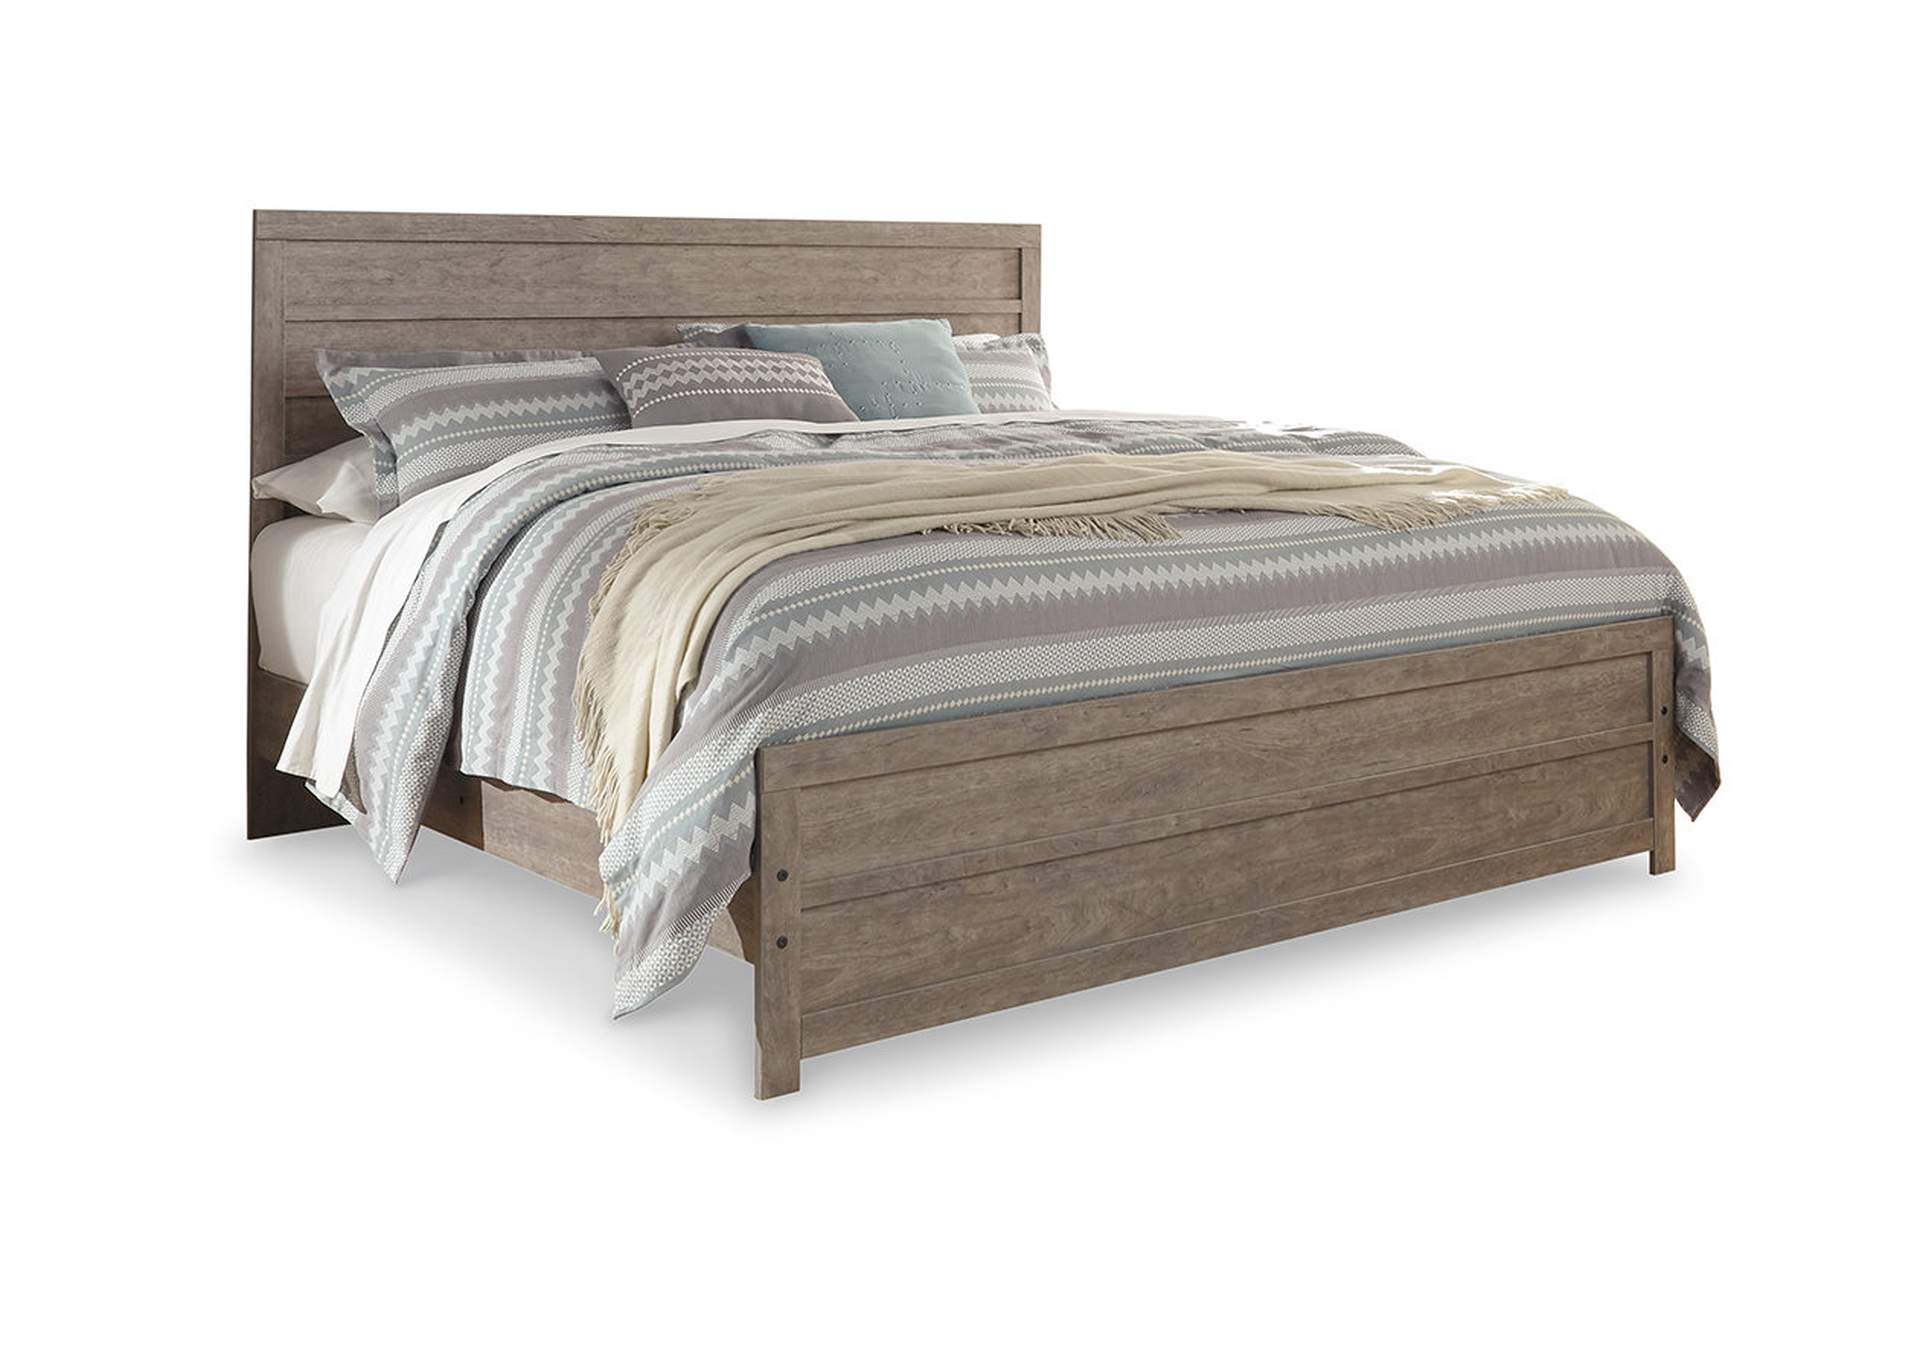 Culverbach King Panel Bed,Signature Design By Ashley